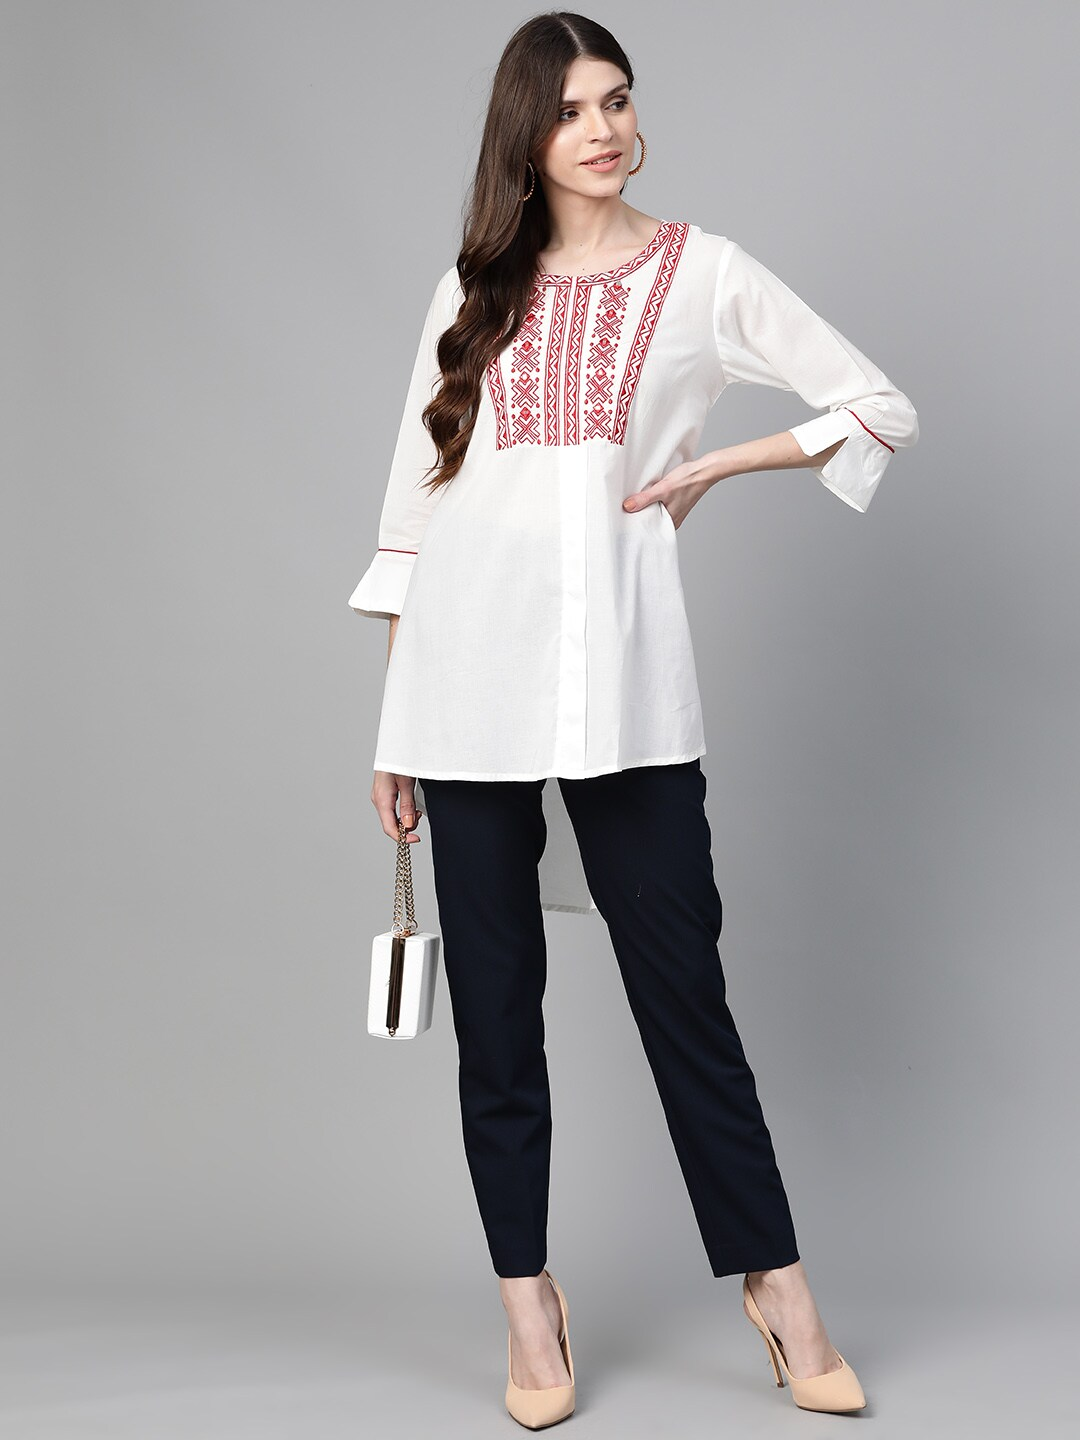 Women's  White & Red Embroidered High-Low Tunic - Wahe-NOOR